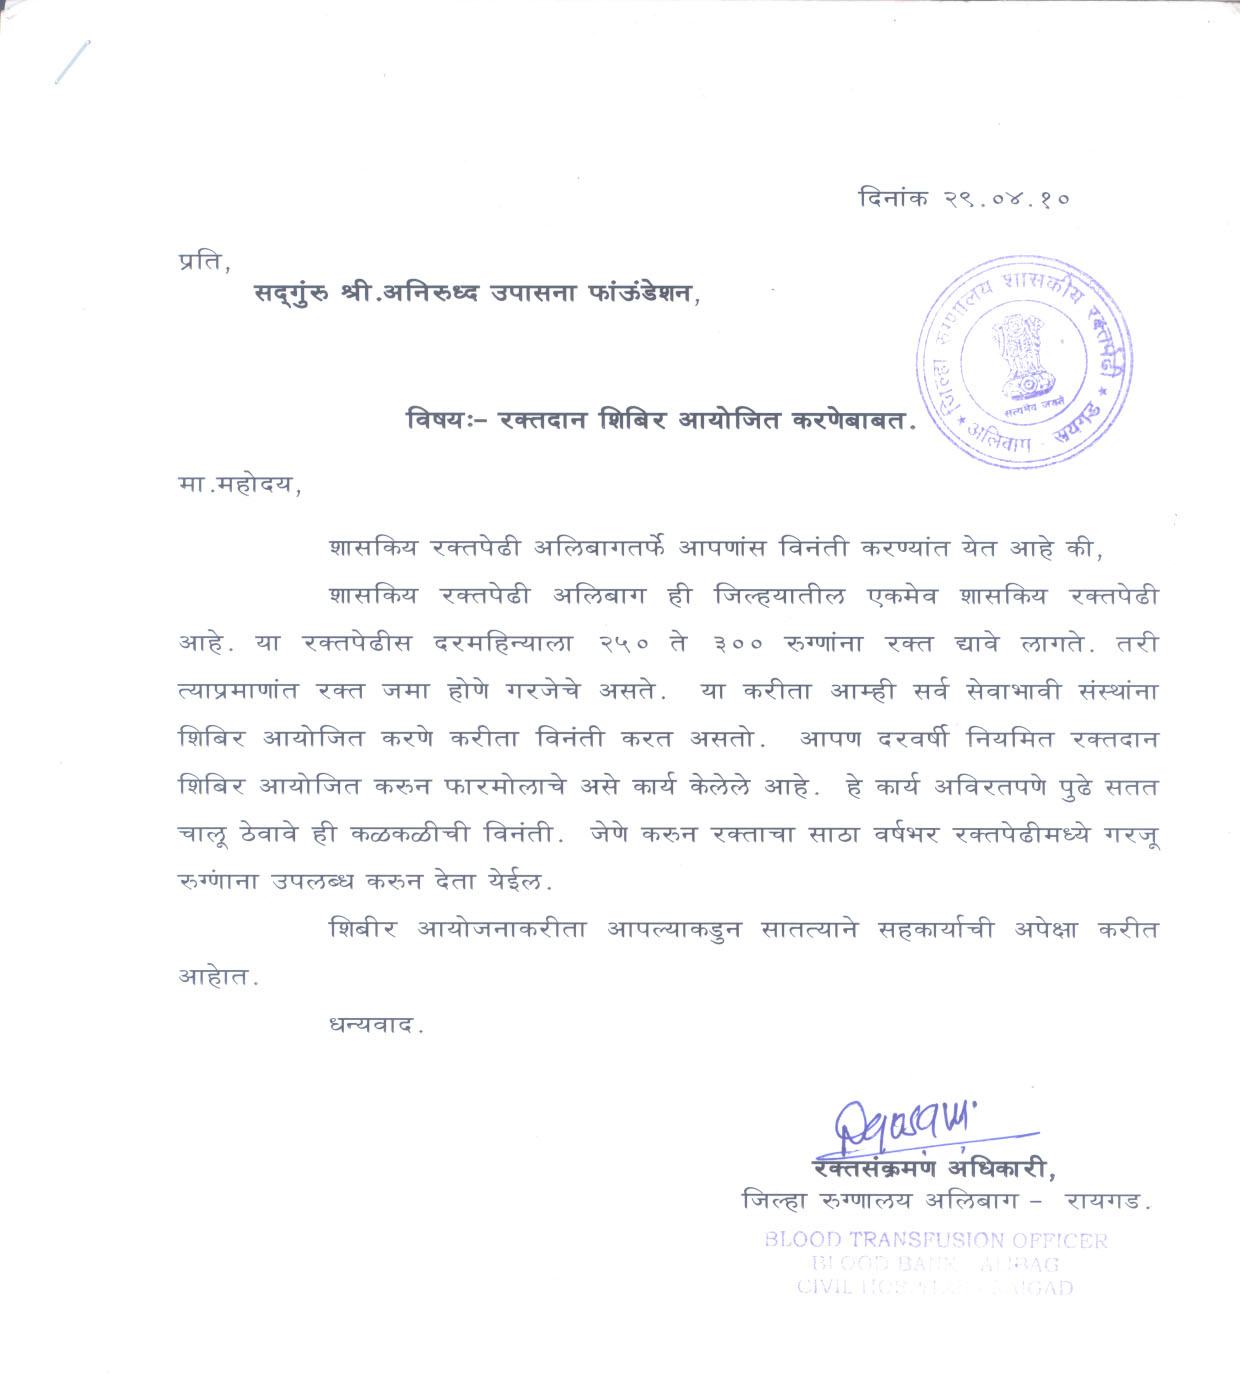 Appreciation-Letter from Dist Rugnalaya Alibag1 2010 -for-Aniruddhafoundation-Compassion-Social-services